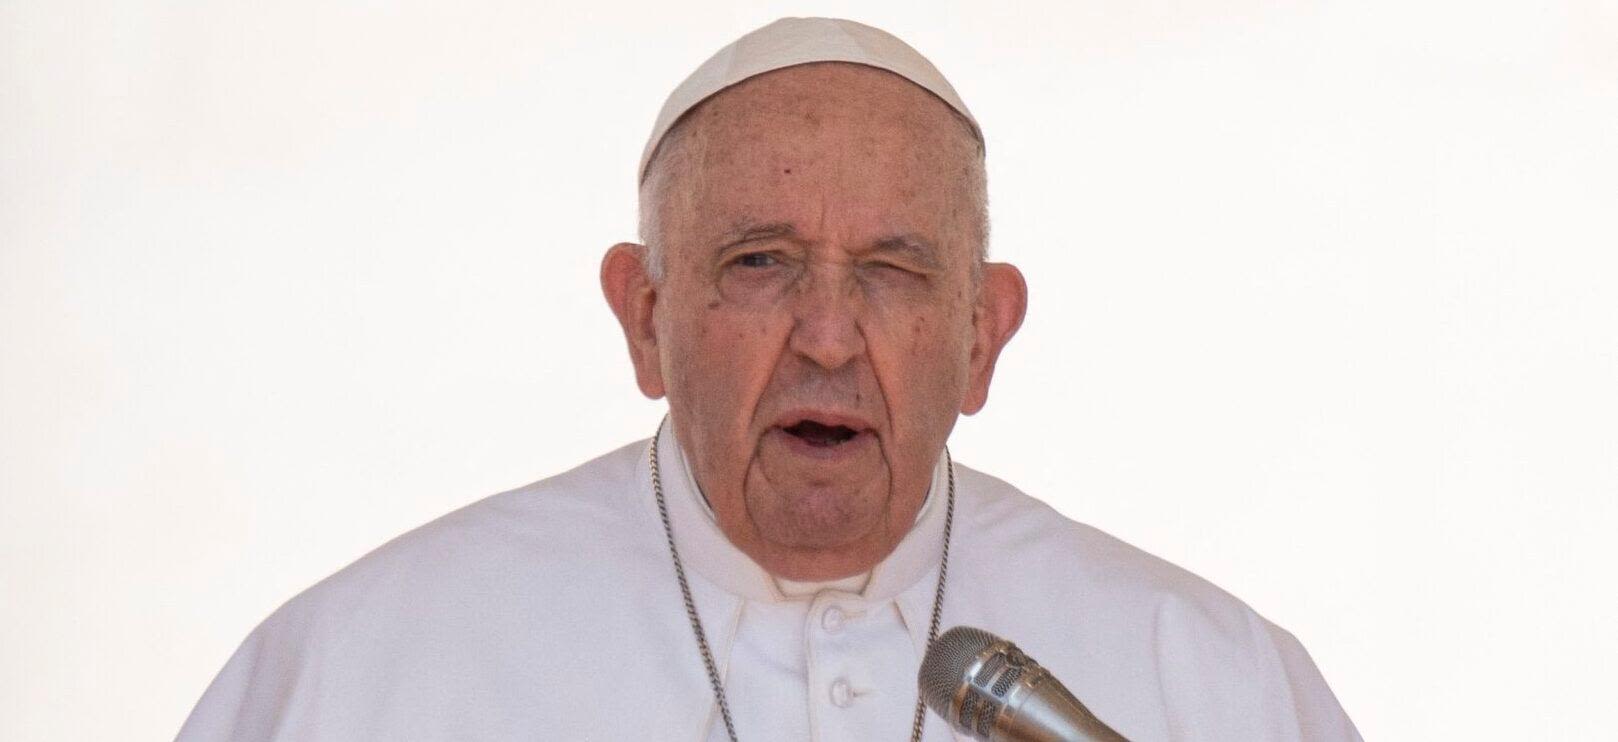 Pope Francis Apologizes For Allegedly Using Slur For Gay Men Amid Severe Backlash